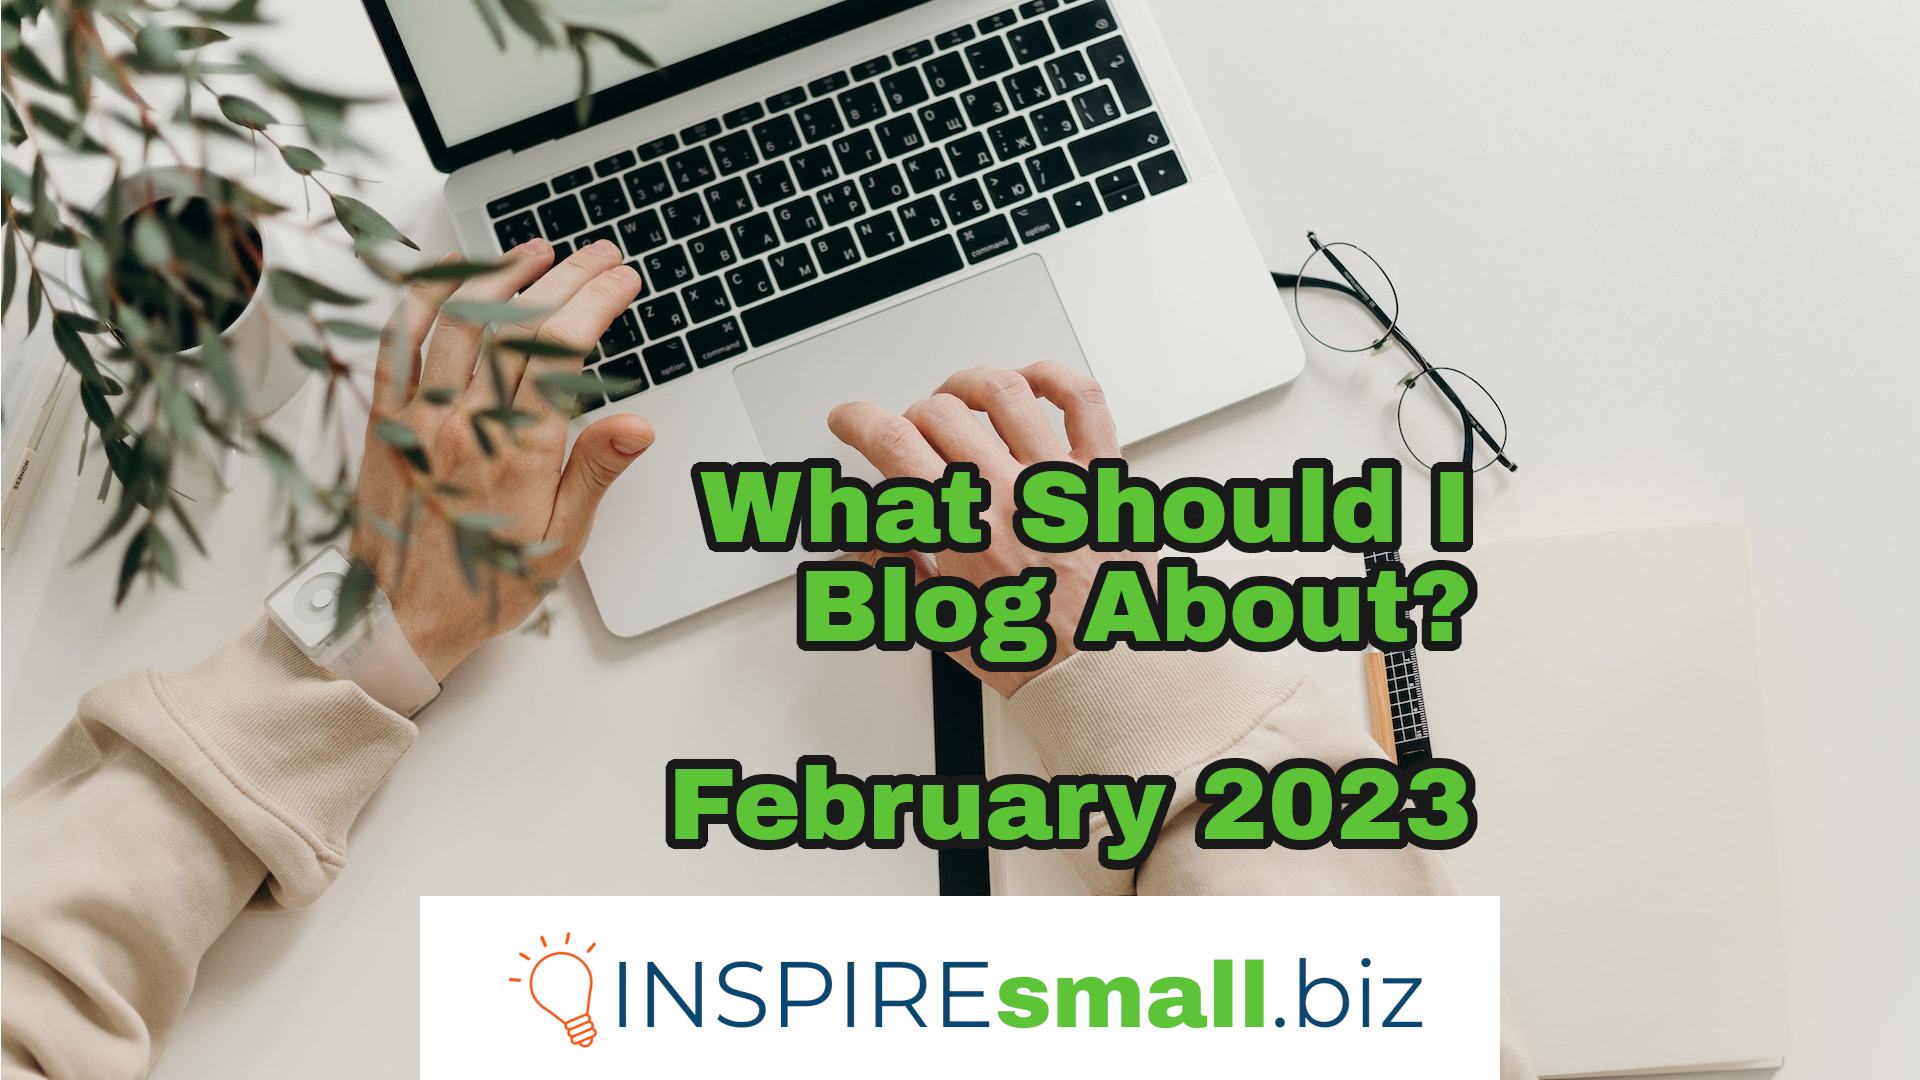 Close up of a person typing on a laptop, next to a plant, on a white table. Green text overlayed reads What Should I Blog About? February 2023, by INSPIREsmall.biz